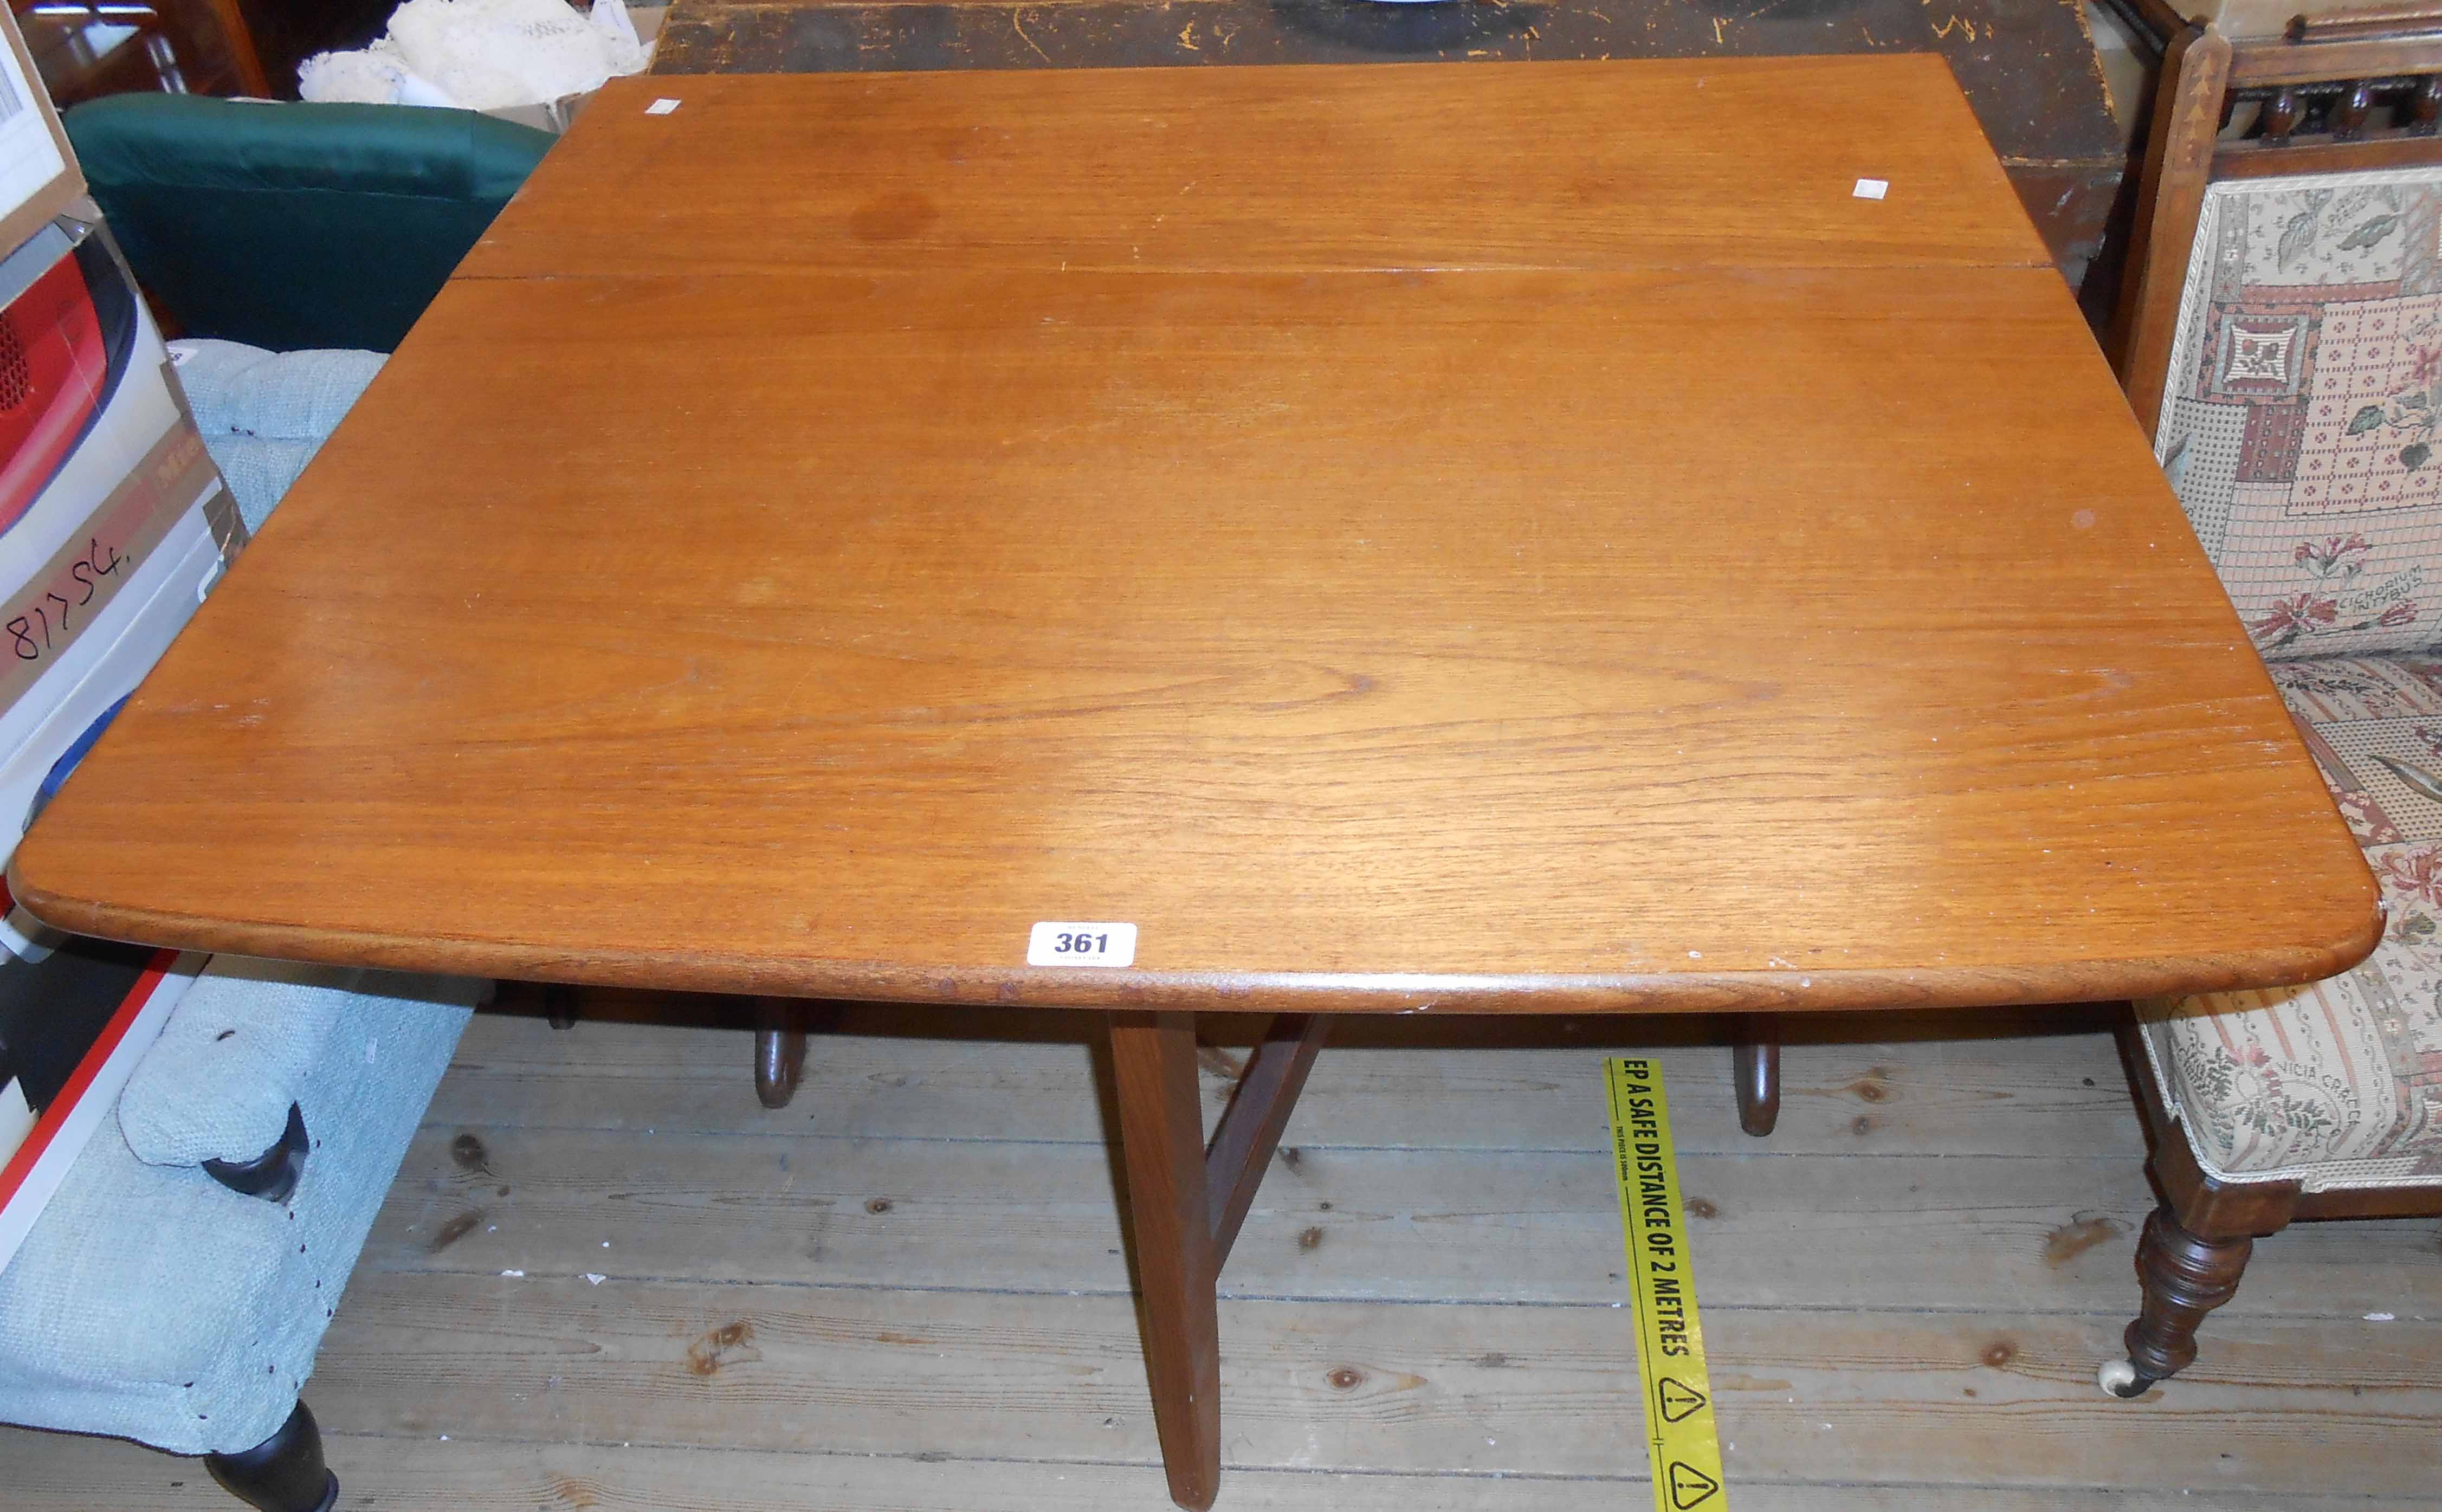 A 36" retro G-Plan style teak effect drop-leaf dining table, set on shaped standard ends - some edge